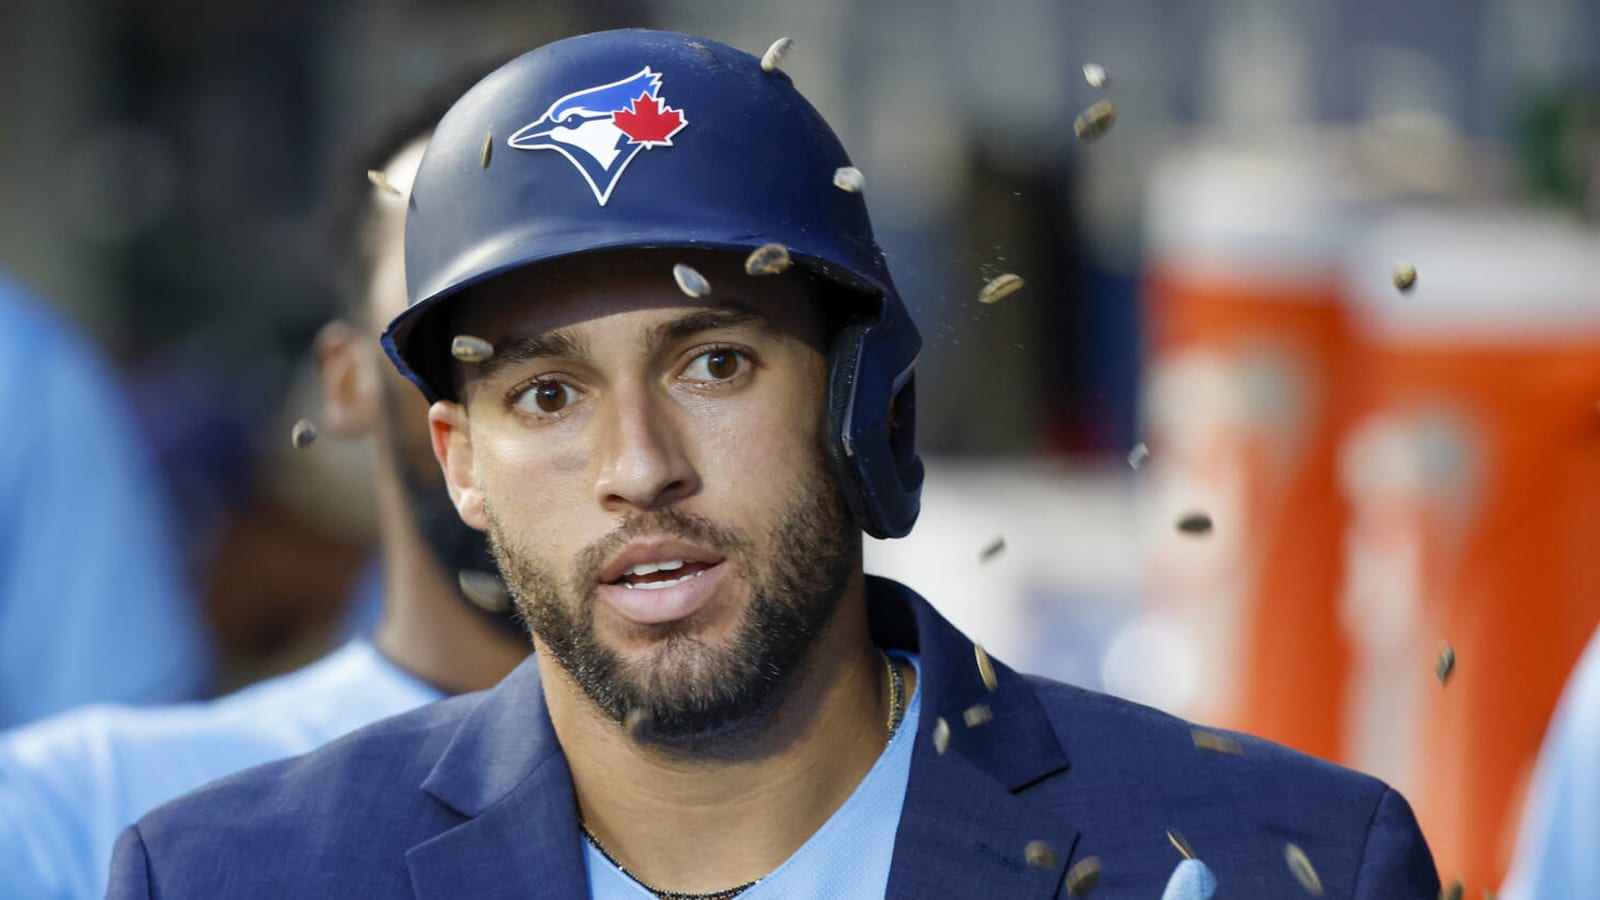 Jays place Springer on 10-day IL with elbow inflammation